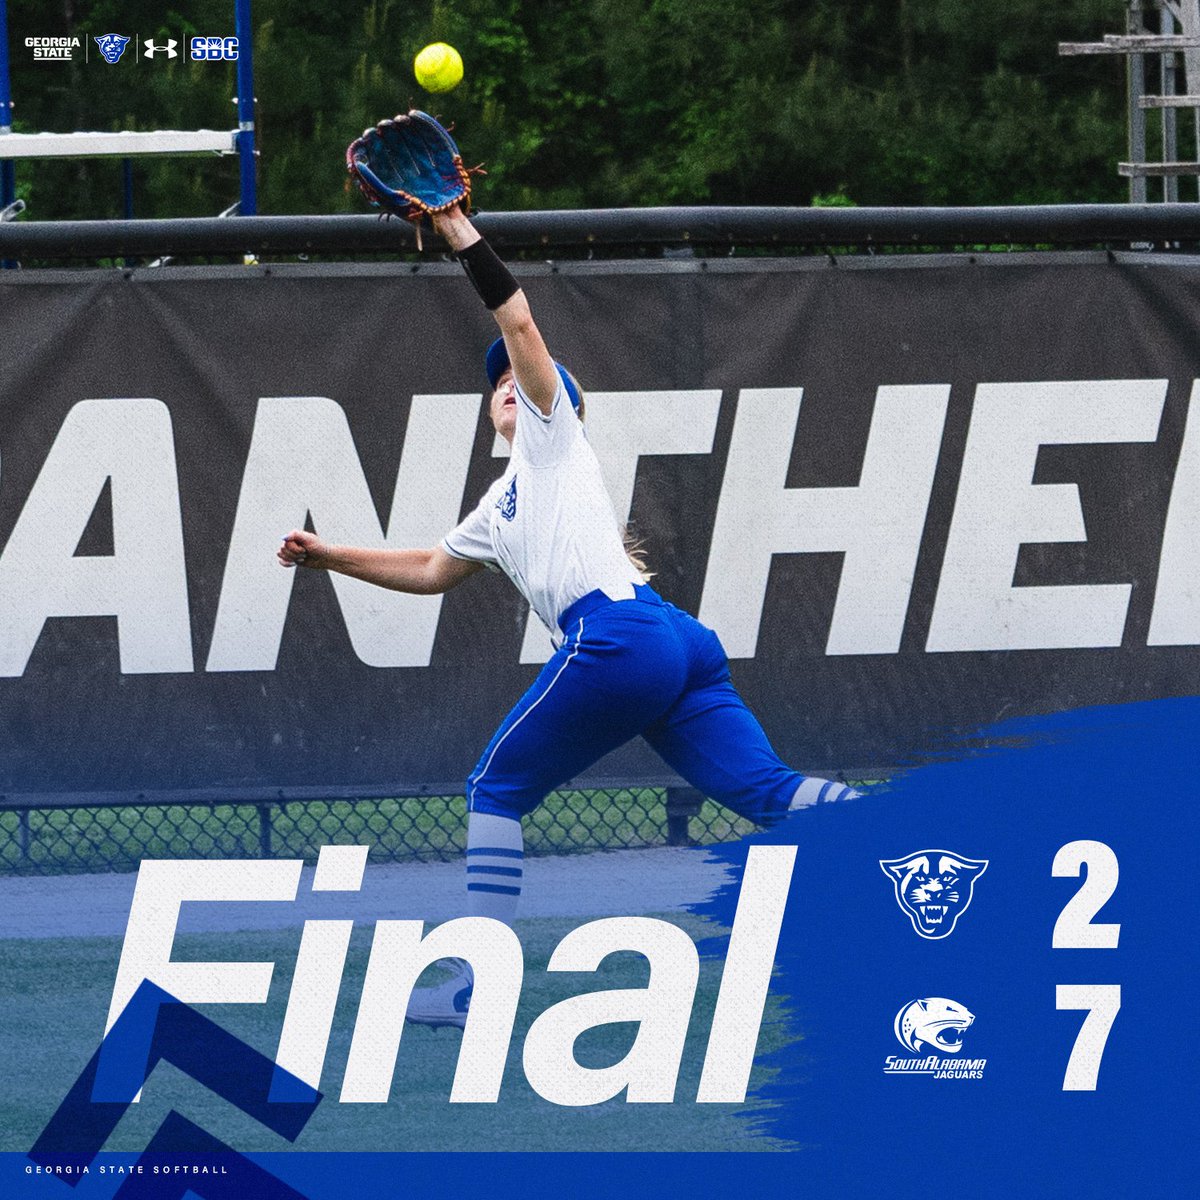 Final. The Panthers are back in action tomorrow for game two against the Jags at 1:00 p.m. #LightItBlue | #MakeItHappen